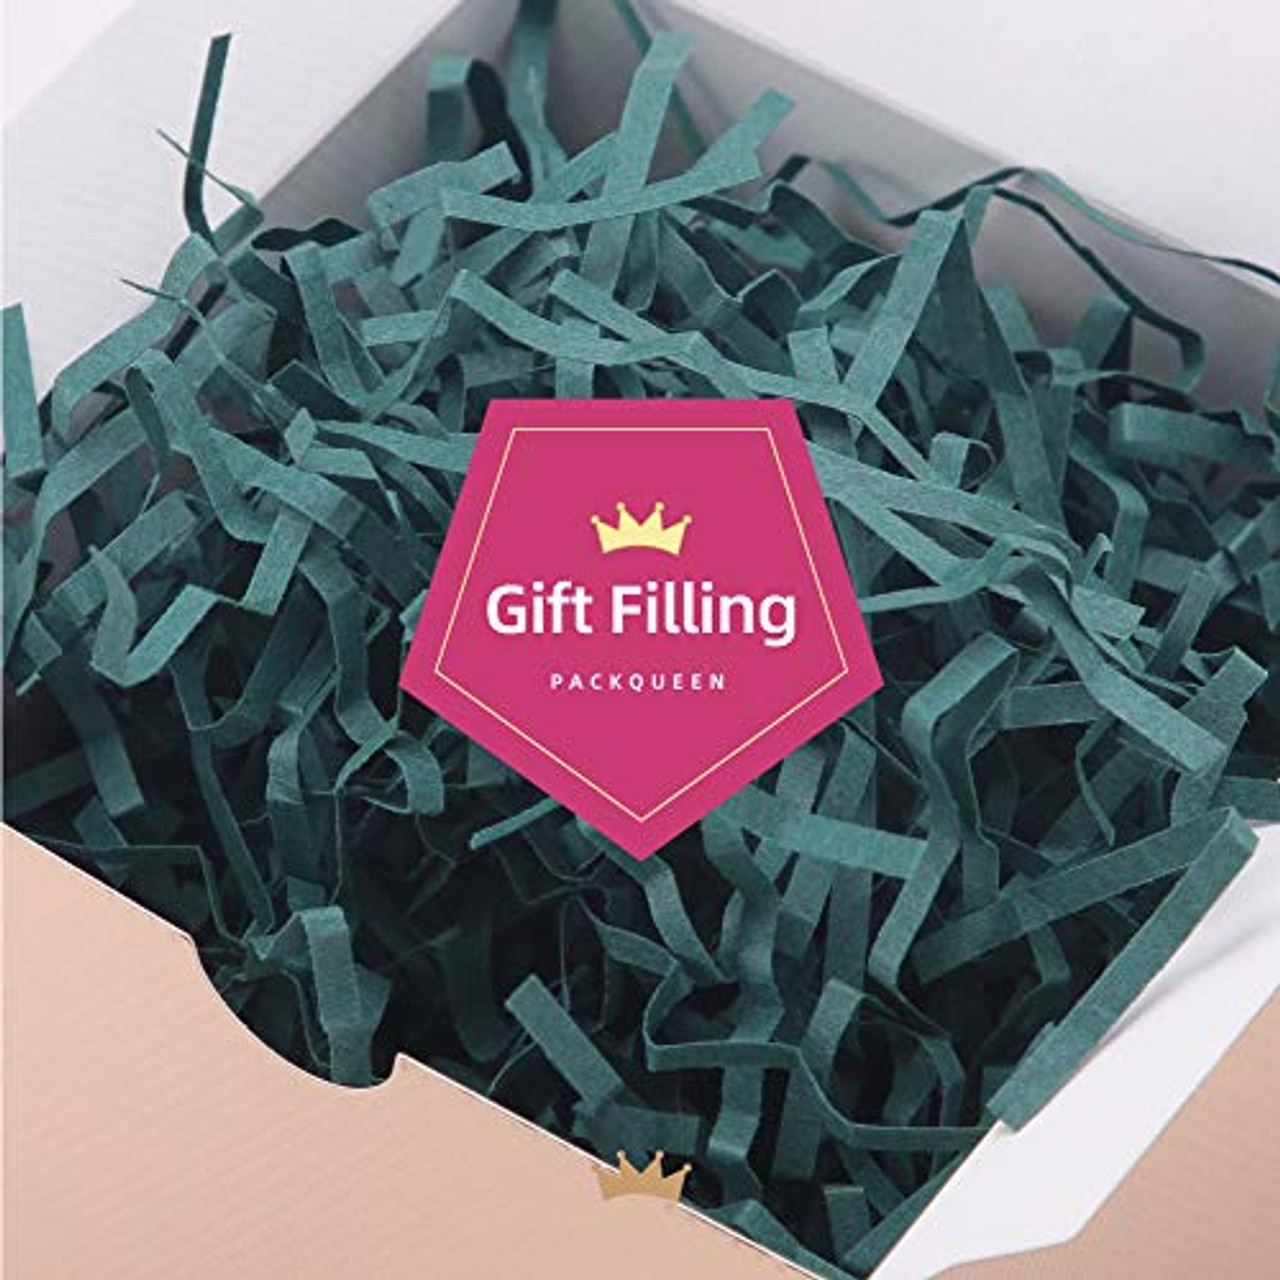 MagicWater Supply Crinkle Cut Paper Shred Filler (1/2 lb) for Gift Wrapping & Basket Filling - Green